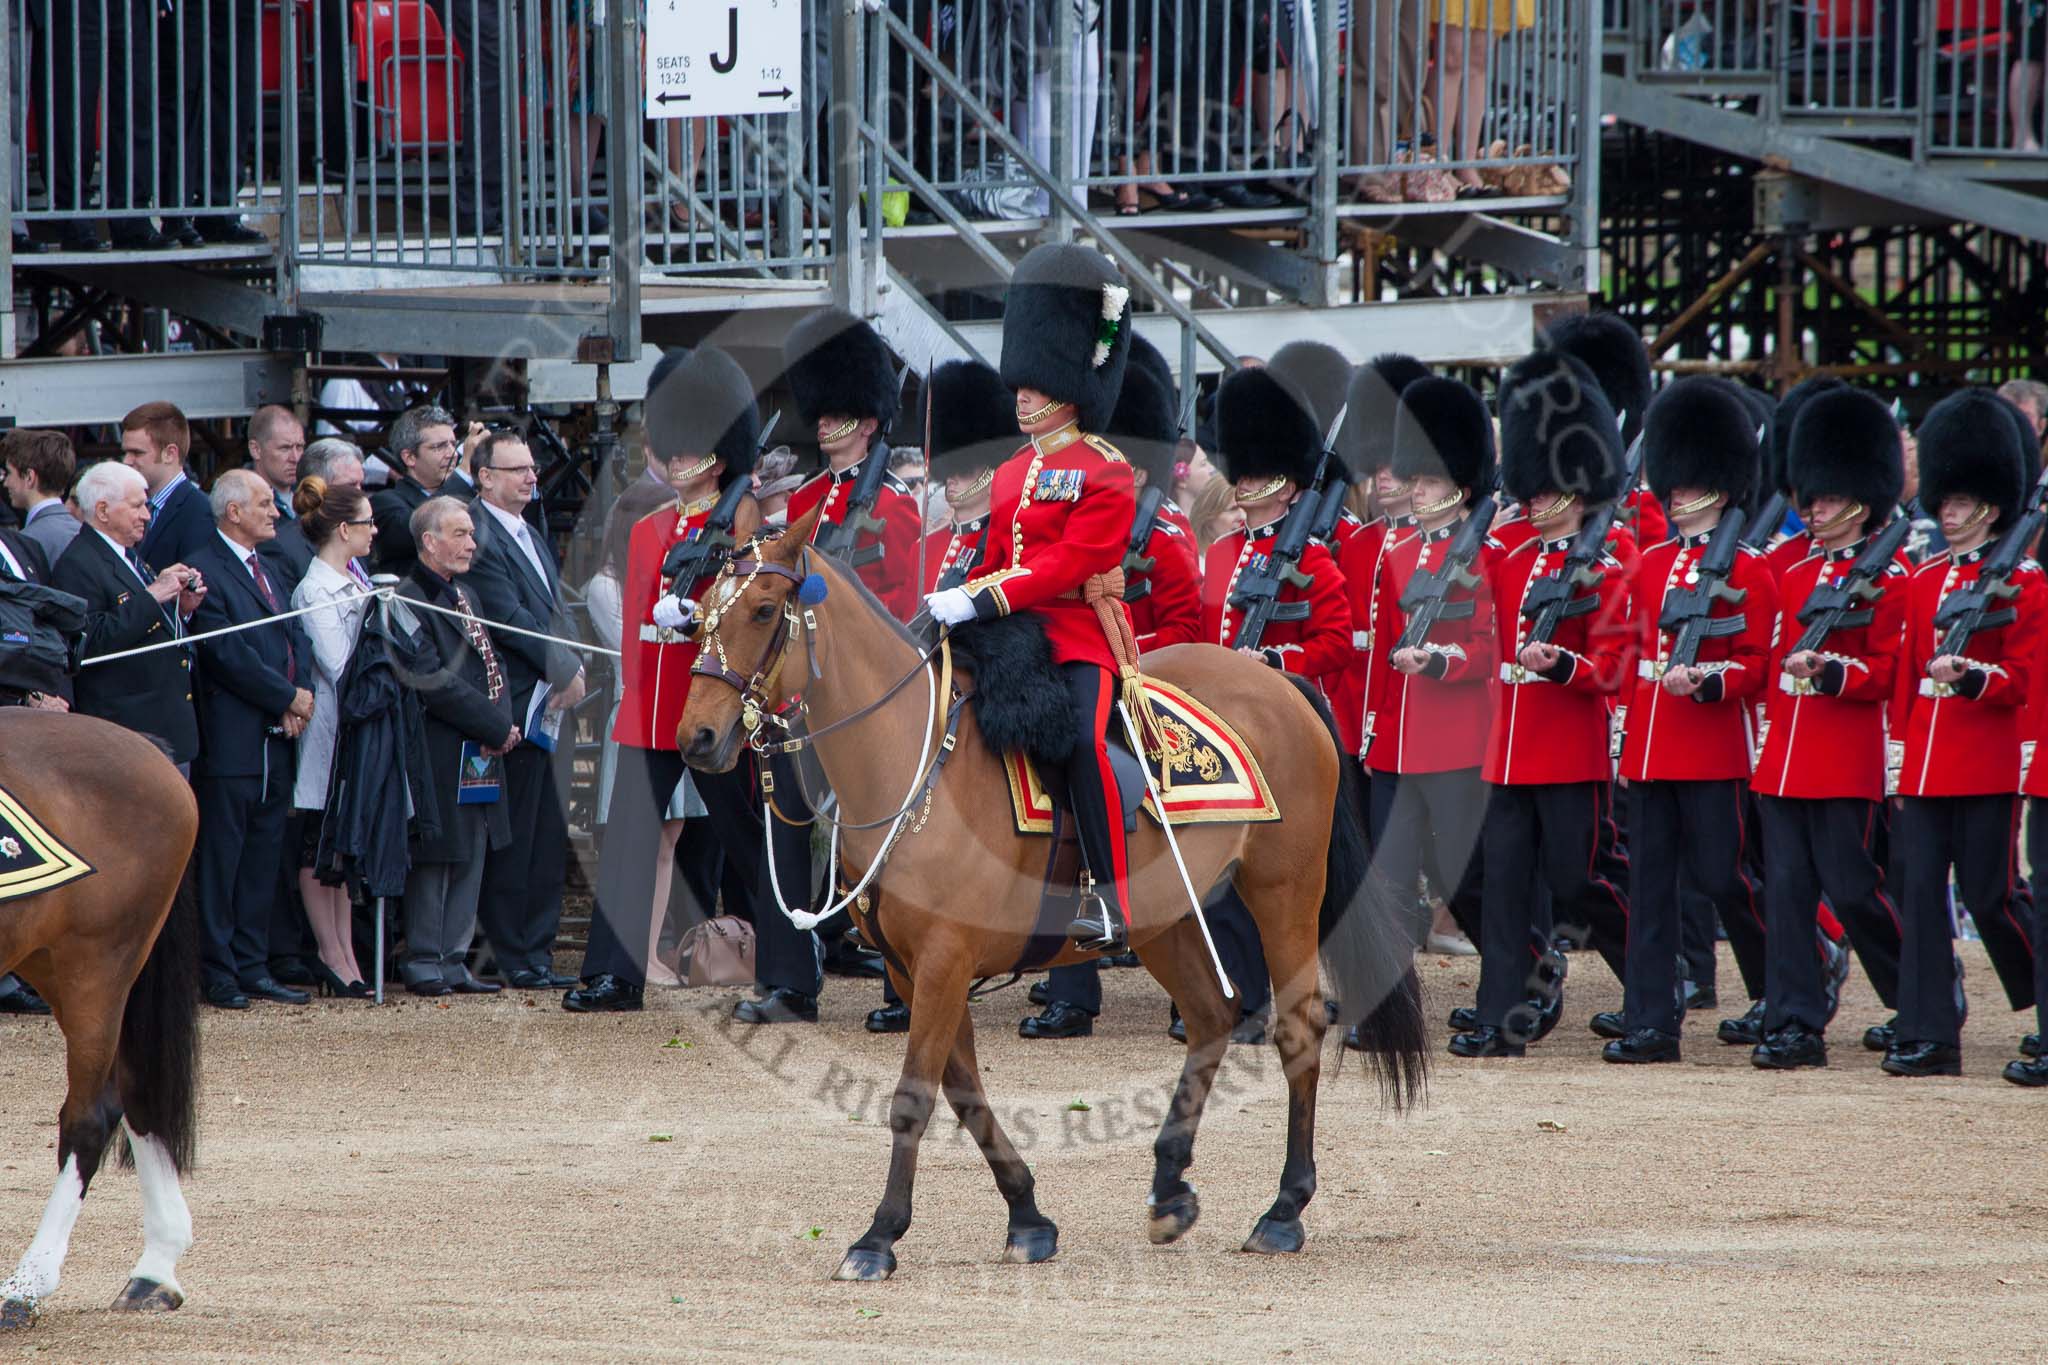 Trooping the Colour 2012: Following the Field Officer during the March Past, the Major of the Parade, Major Mark Lewis, Welsh Guards. Behind him No. 1 Guard, the Escort to the Colour..
Horse Guards Parade, Westminster,
London SW1,

United Kingdom,
on 16 June 2012 at 11:34, image #391